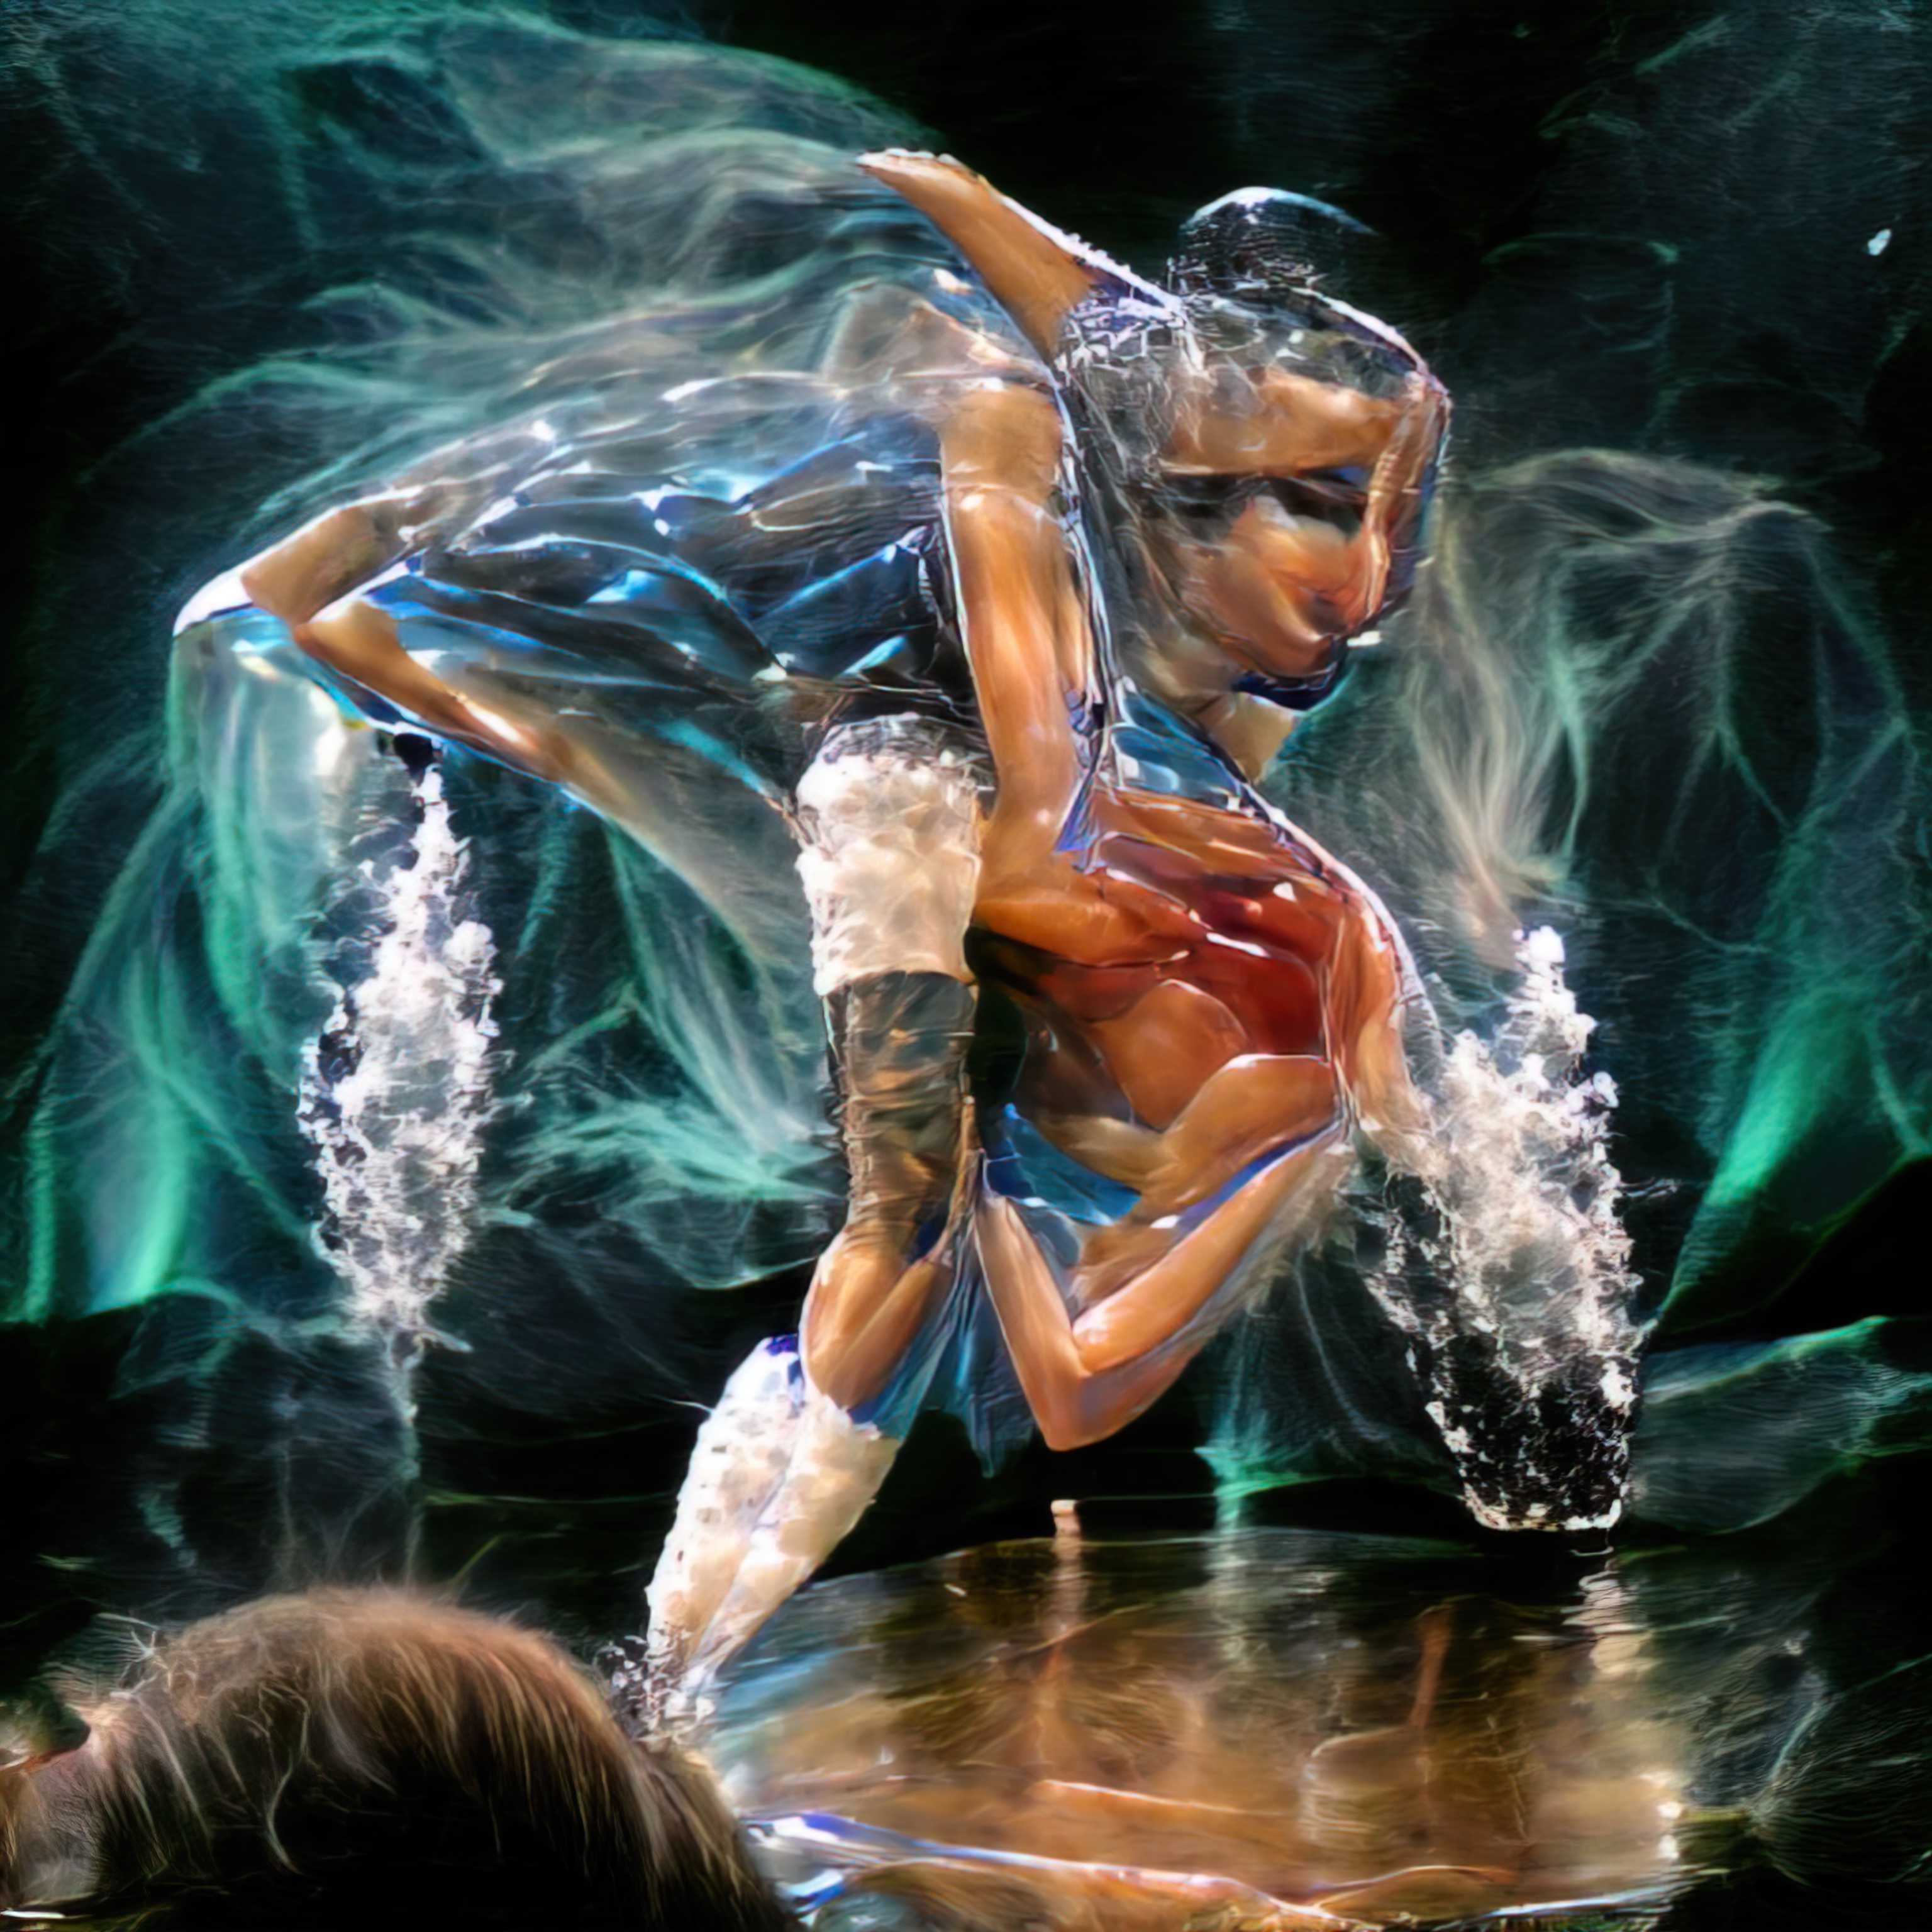 This generative image this image depicts what a Butoh dancer might visualize when using the “Noguchi Taiso” water body method of motion, where you visualize your body as being water wrapped around bones.